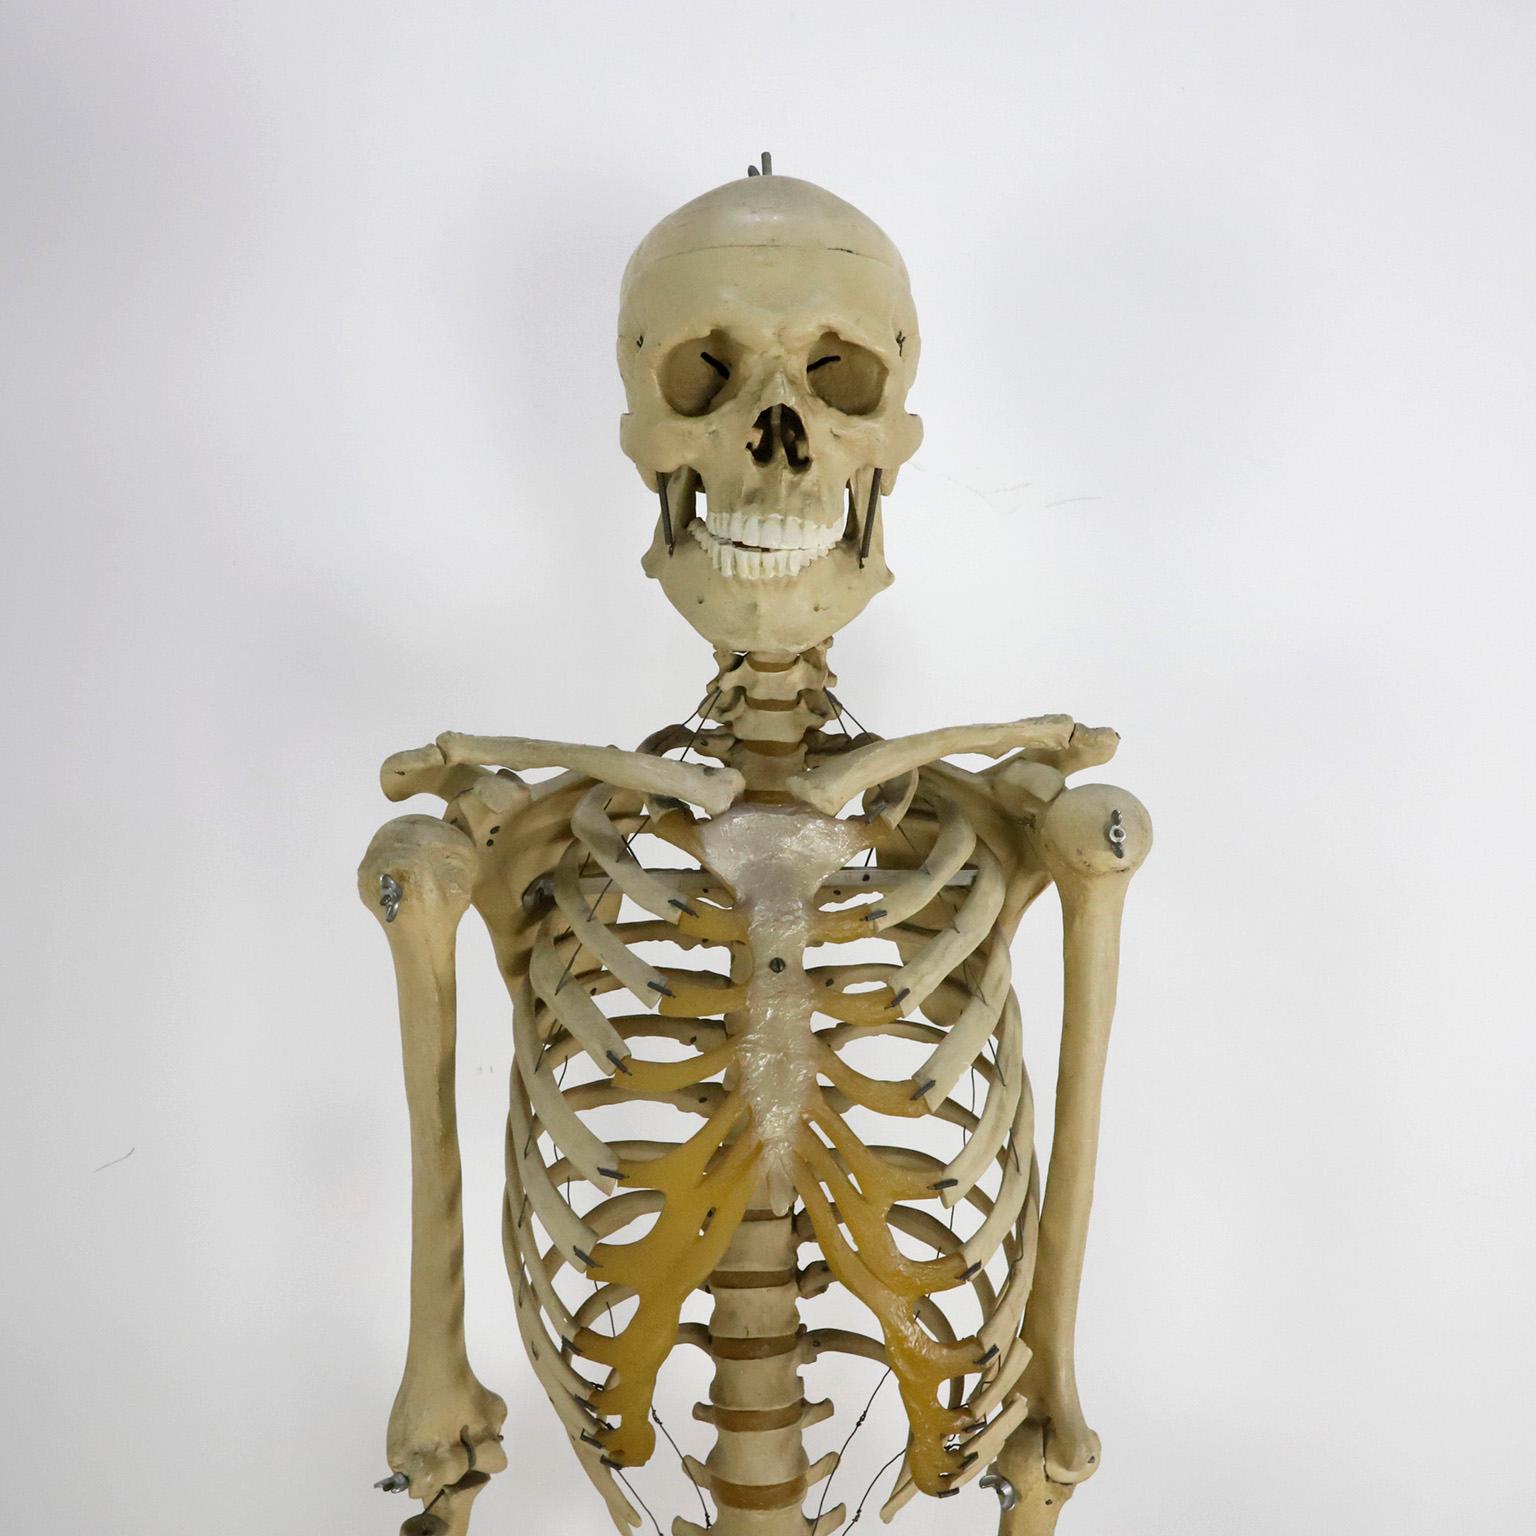 Circa 1950. We offer this Antique Real Size Human Skeleton. Made in resin and wood base.